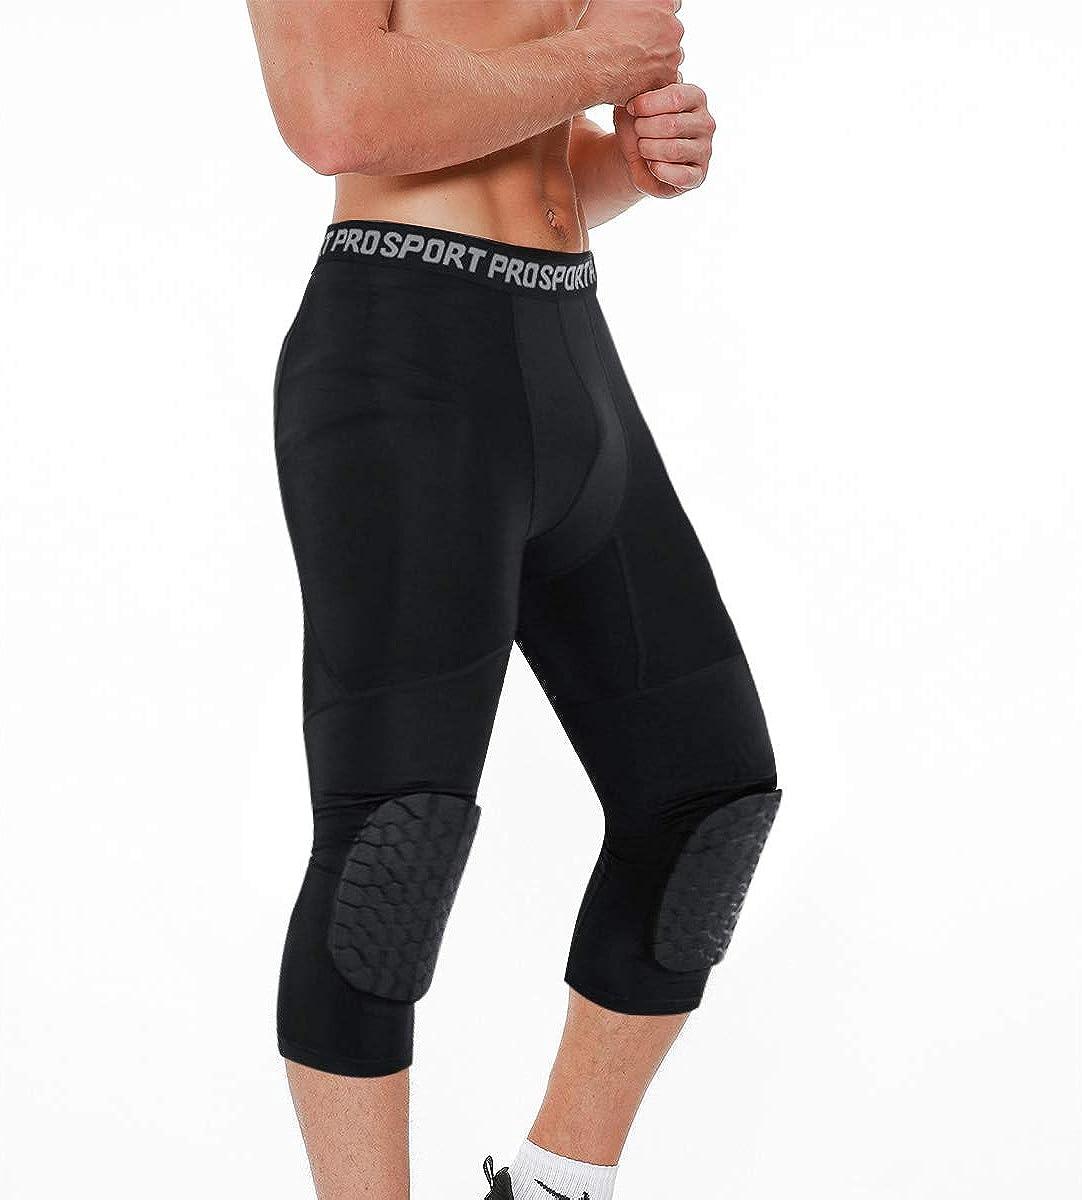 TUOY Men's Padded Pants with Knee Pad 3/4 Capri Compression Pants